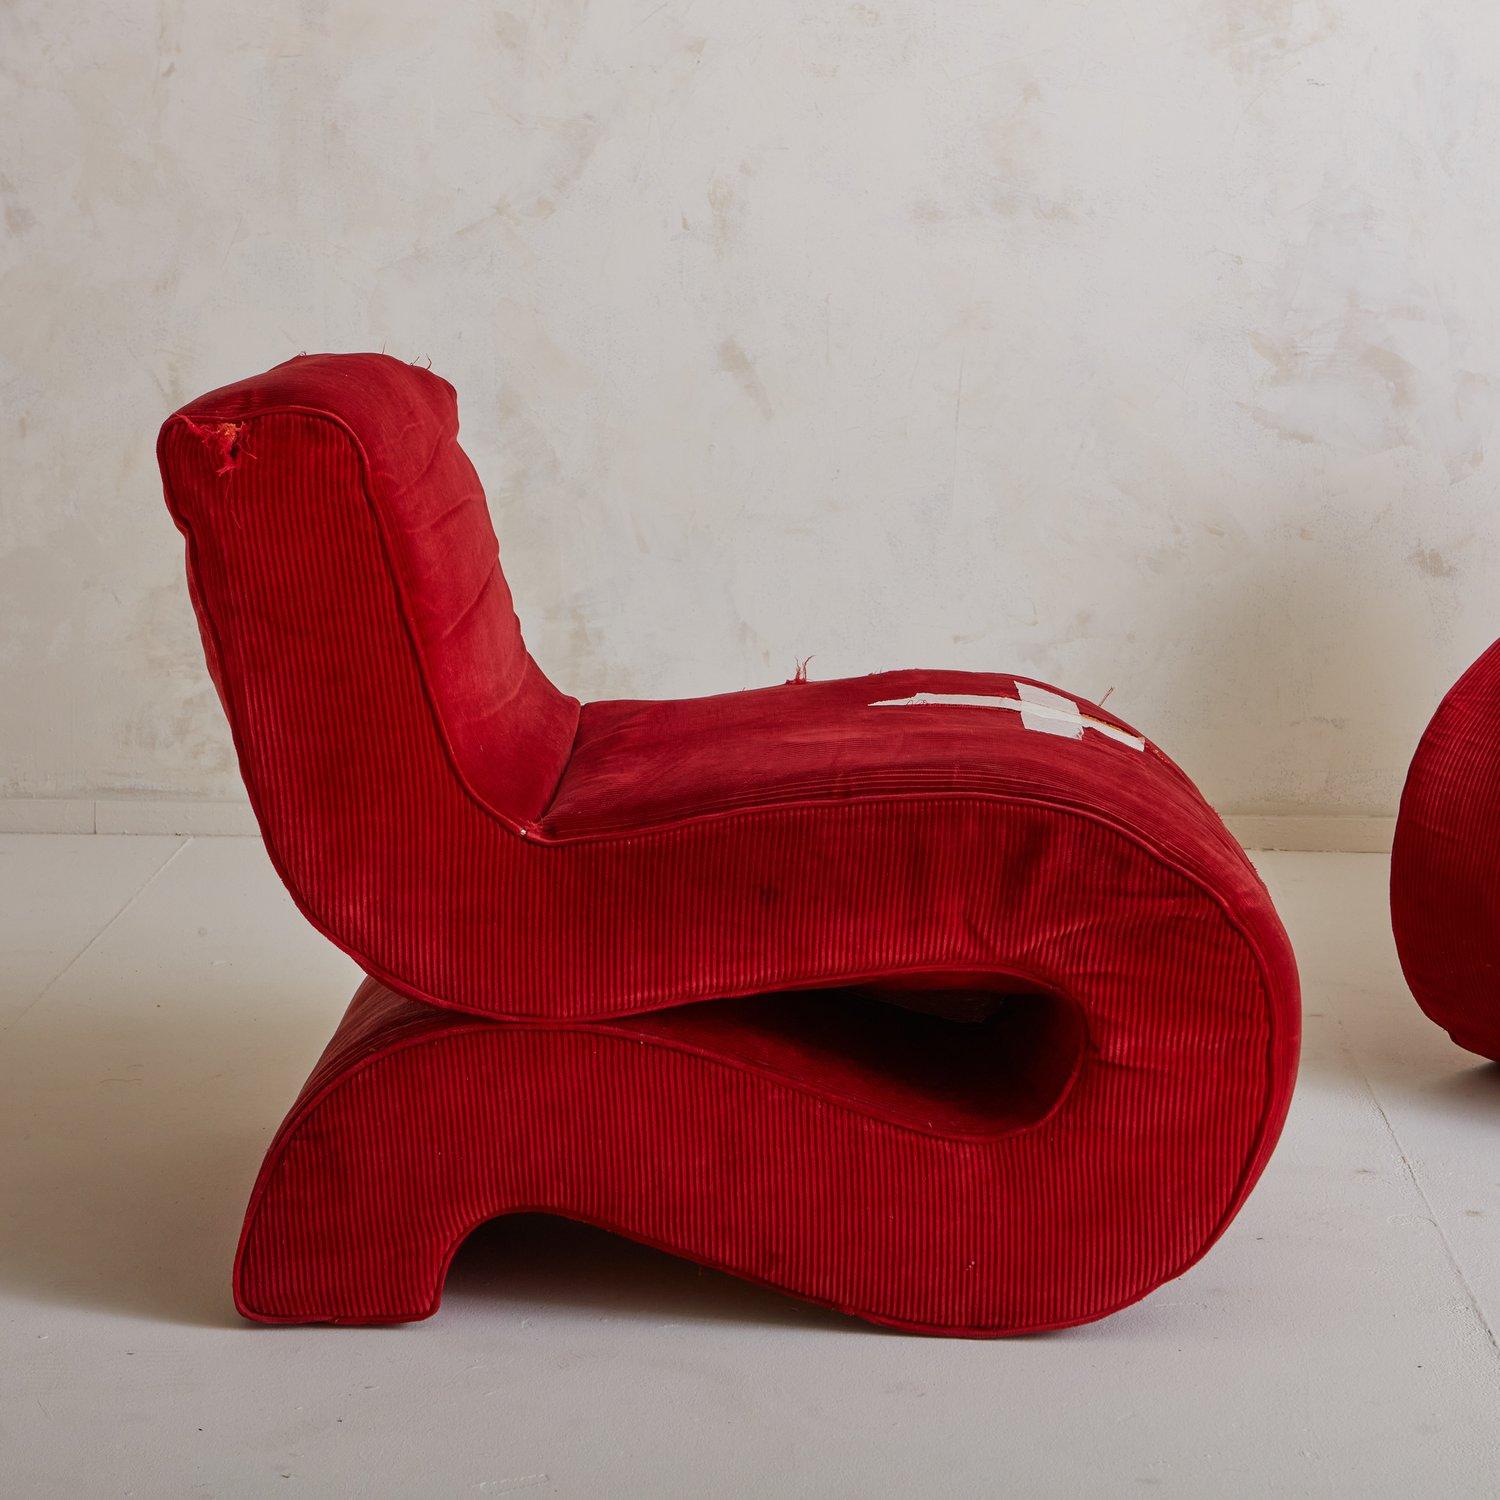 Pair of Noodle Chairs Attributed to Augusto Betti for Habitat Faenza, 1967 For Sale 2